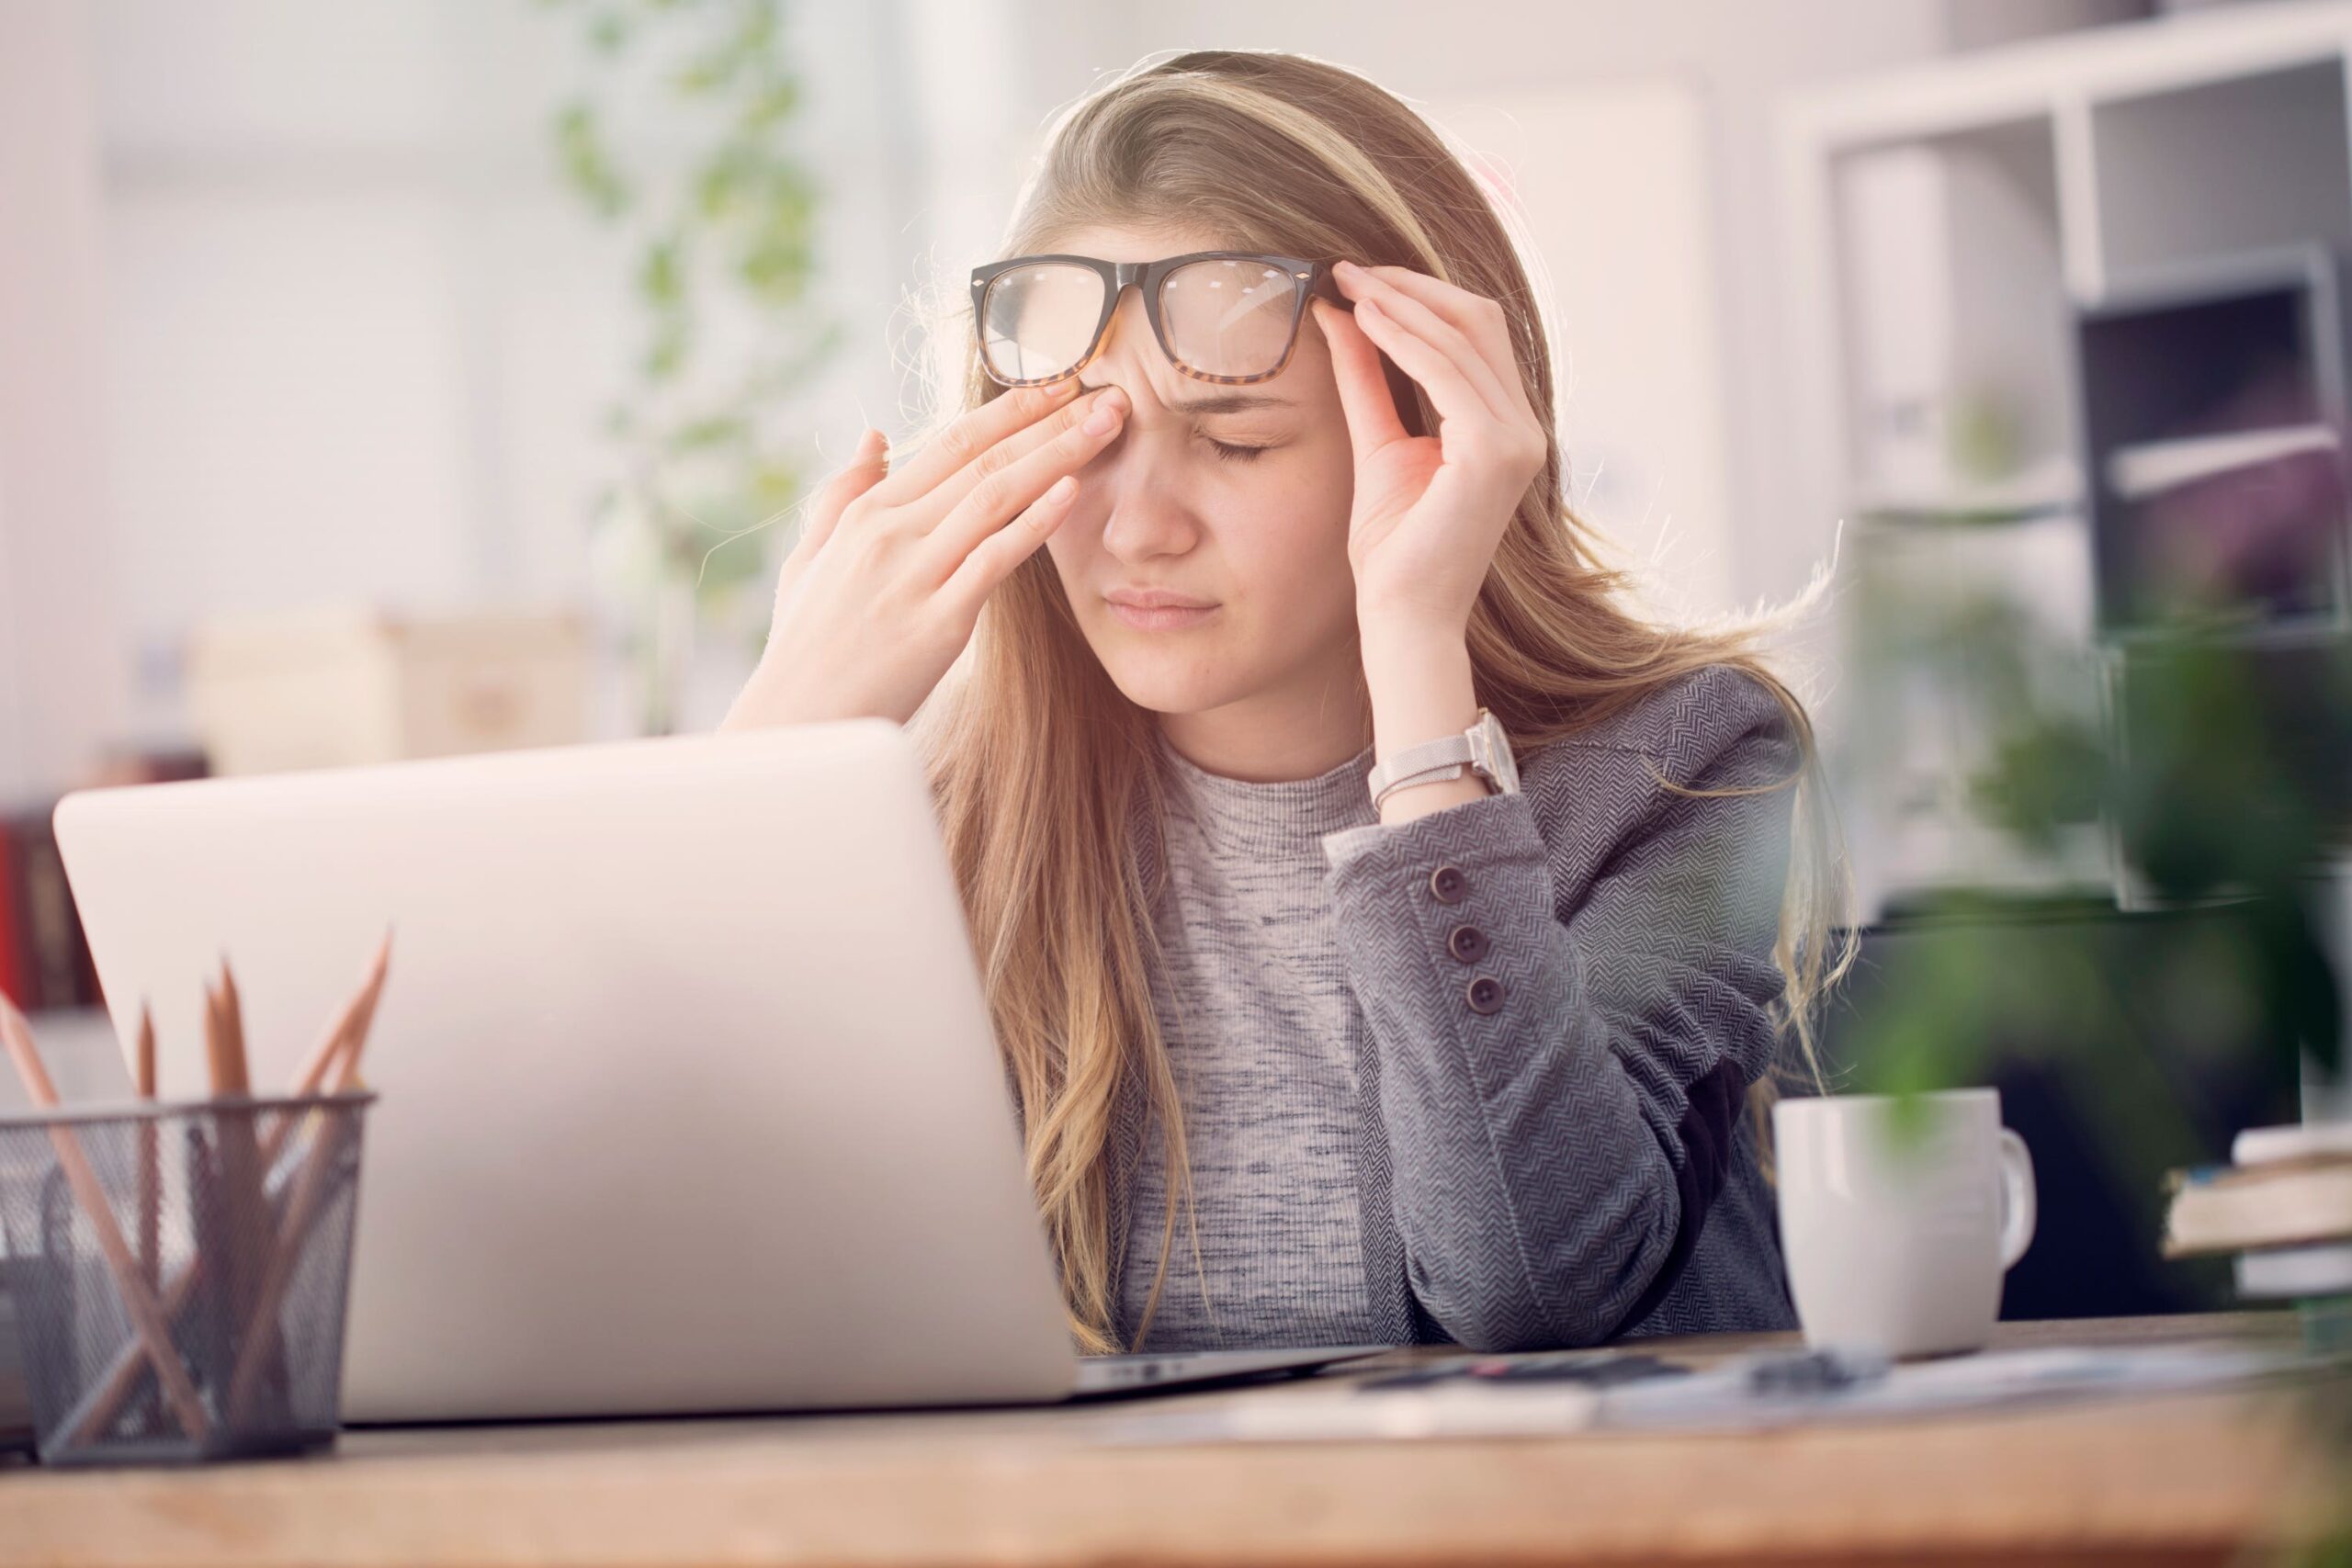 How can i avoid eye strain while working from home